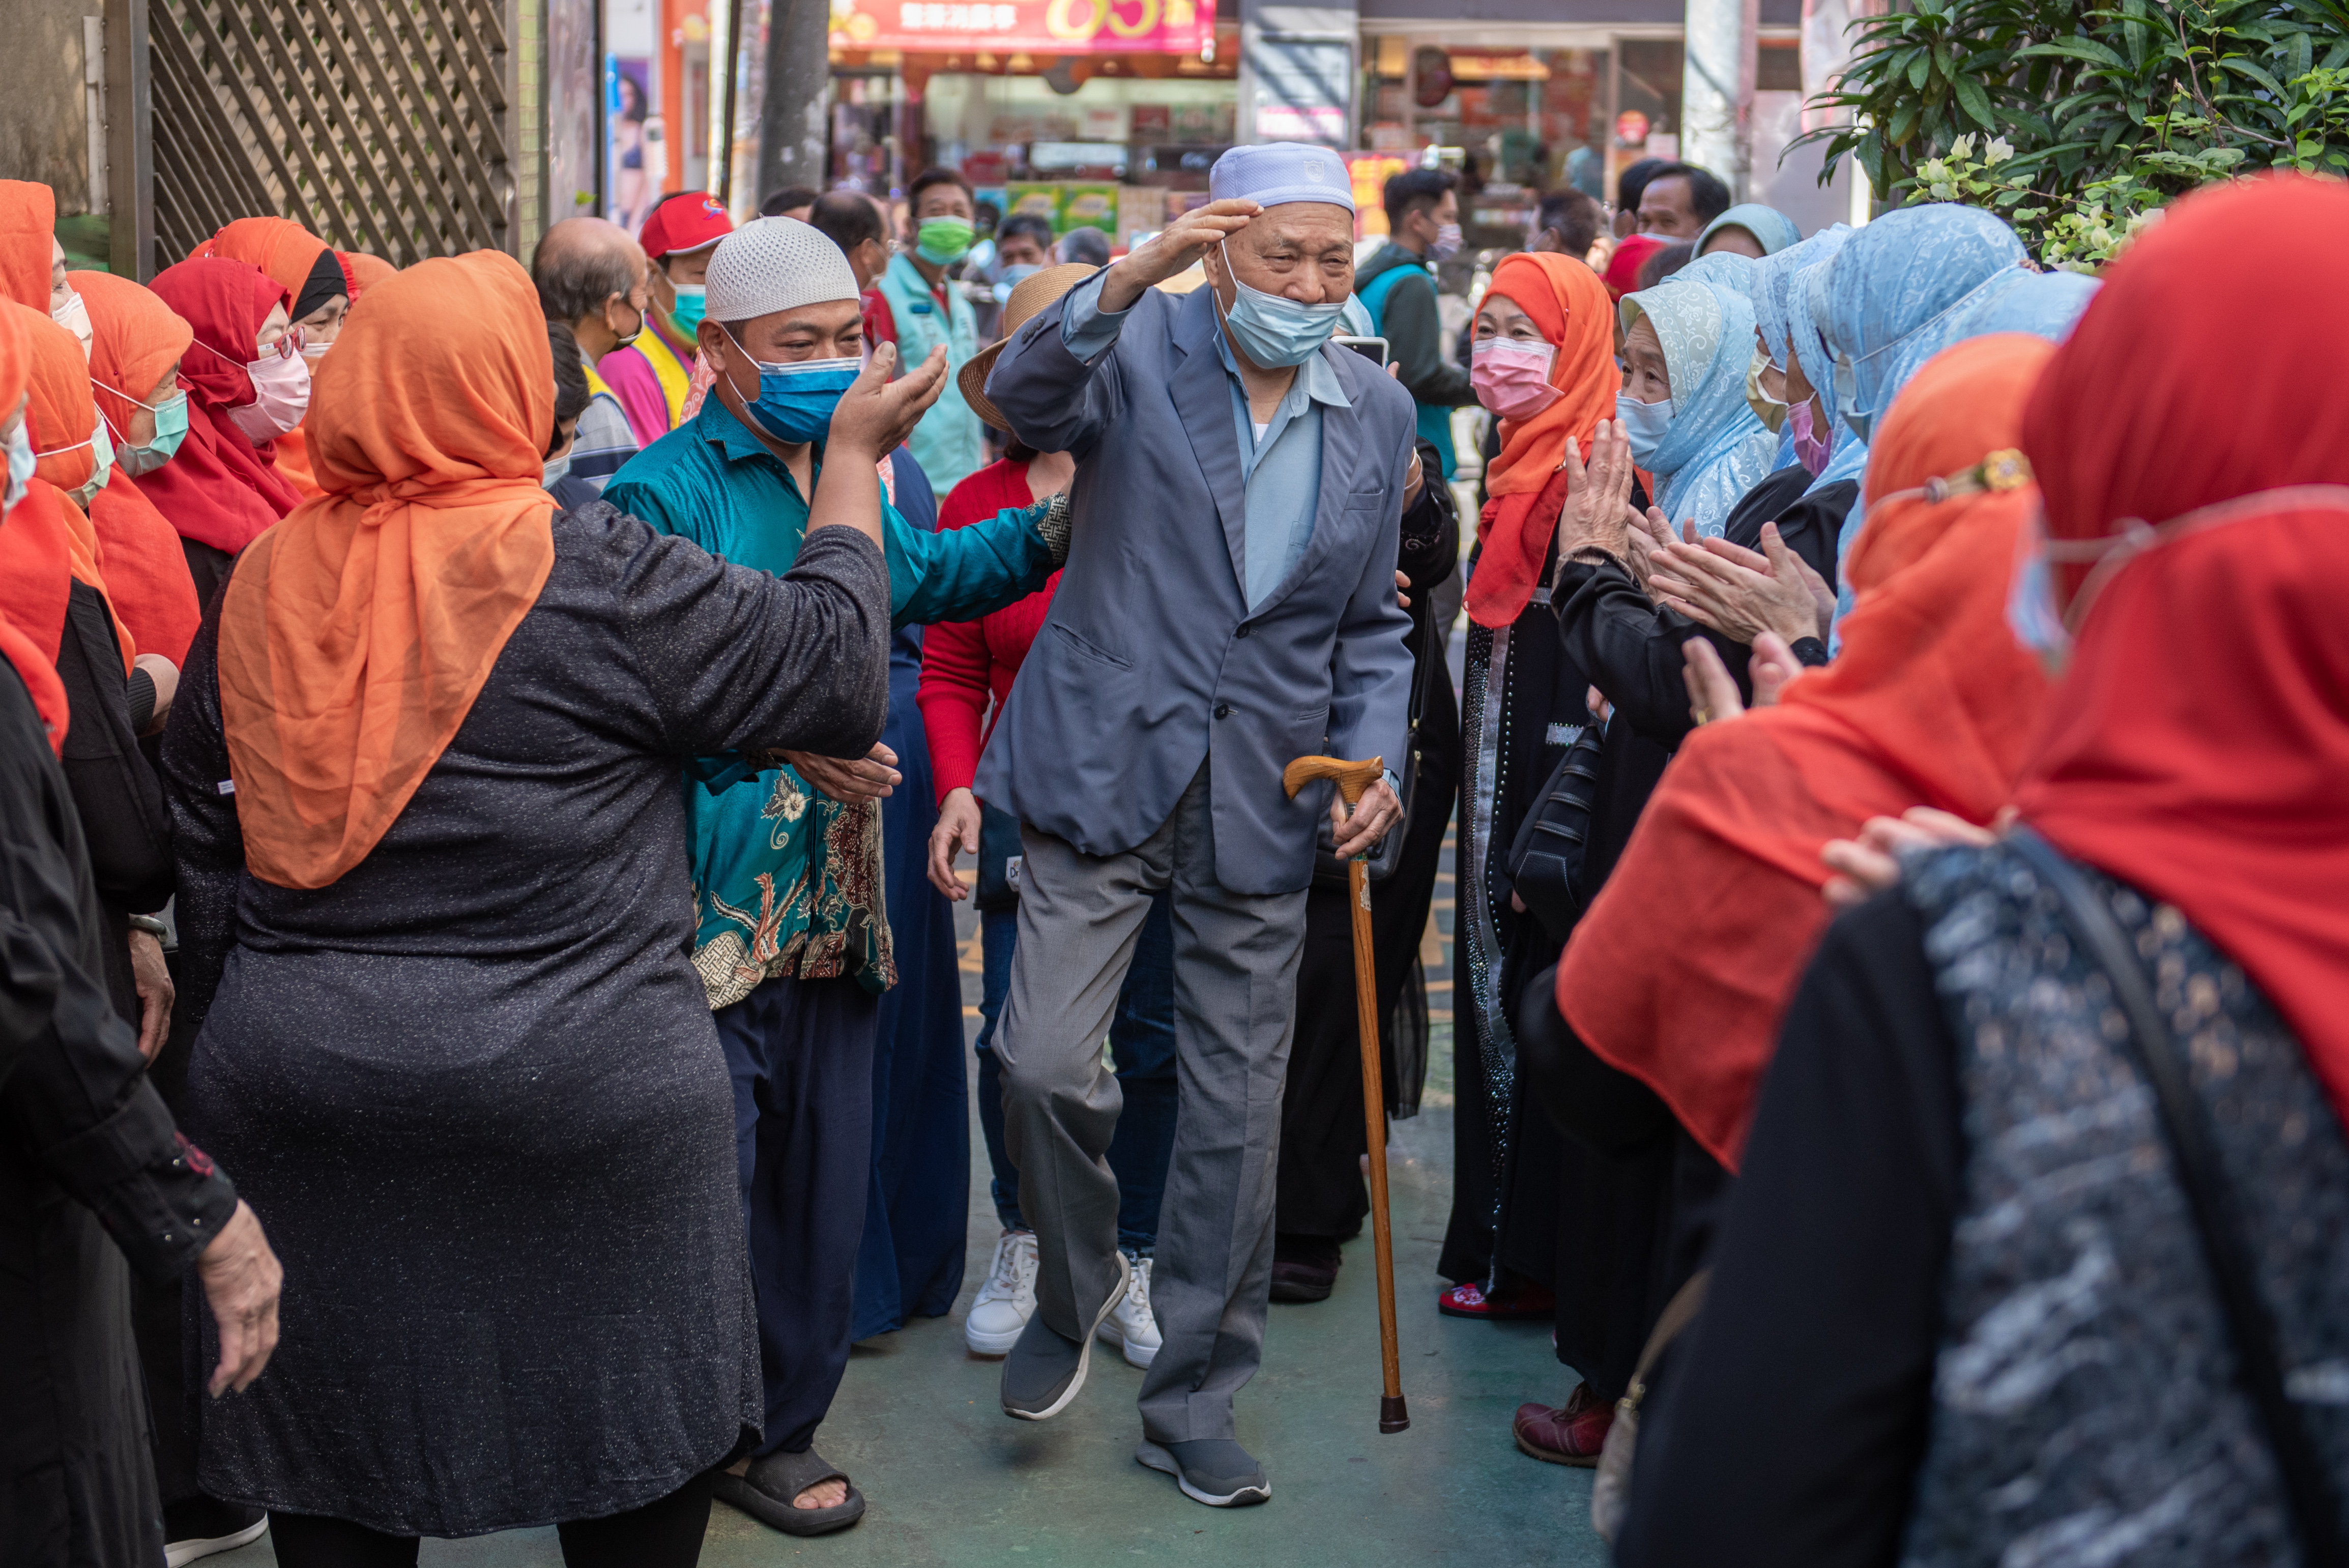 Many Muslims went to the Longgang Mosque in Taoyuan to participate in religious activities. (Photo / Provided by the Taoyuan City Government)